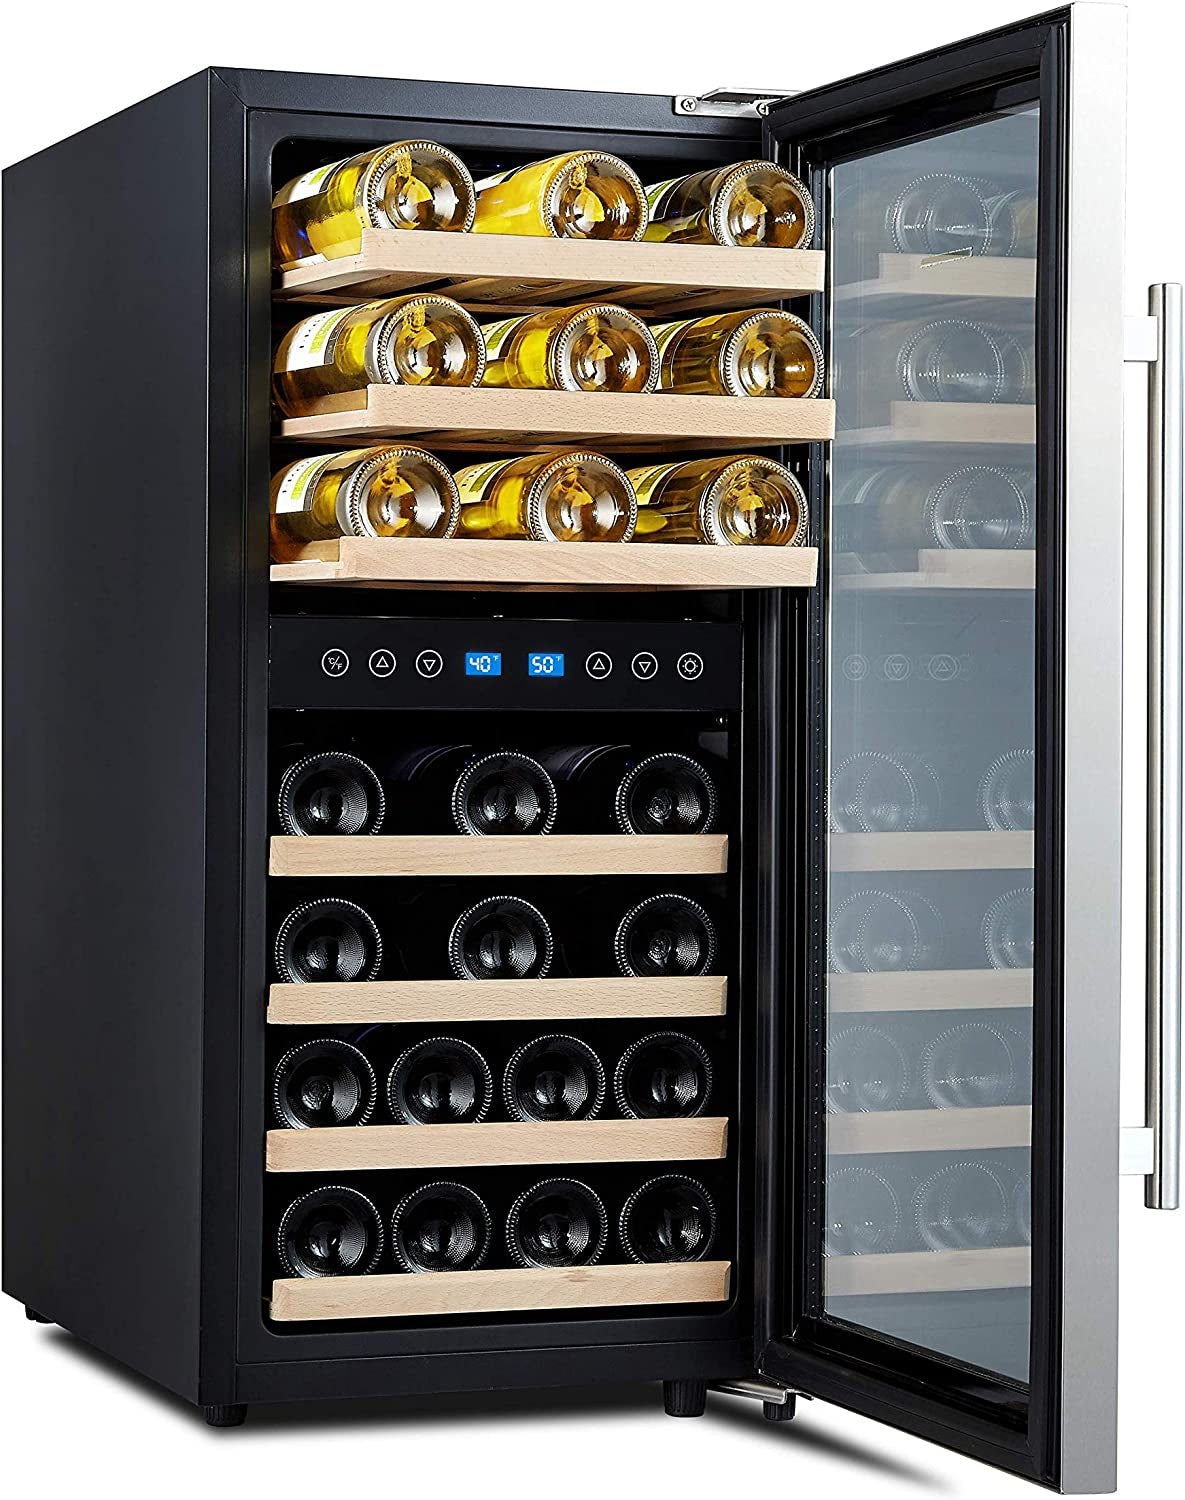 Dual Zone Wine Cooler Refrigerator - 33 Bottle Free Standing Compressor Fridge and Chiller for Red and White Wines - 16'' Glass Door Wine Refrigerator with Digital Memory Temperature Control